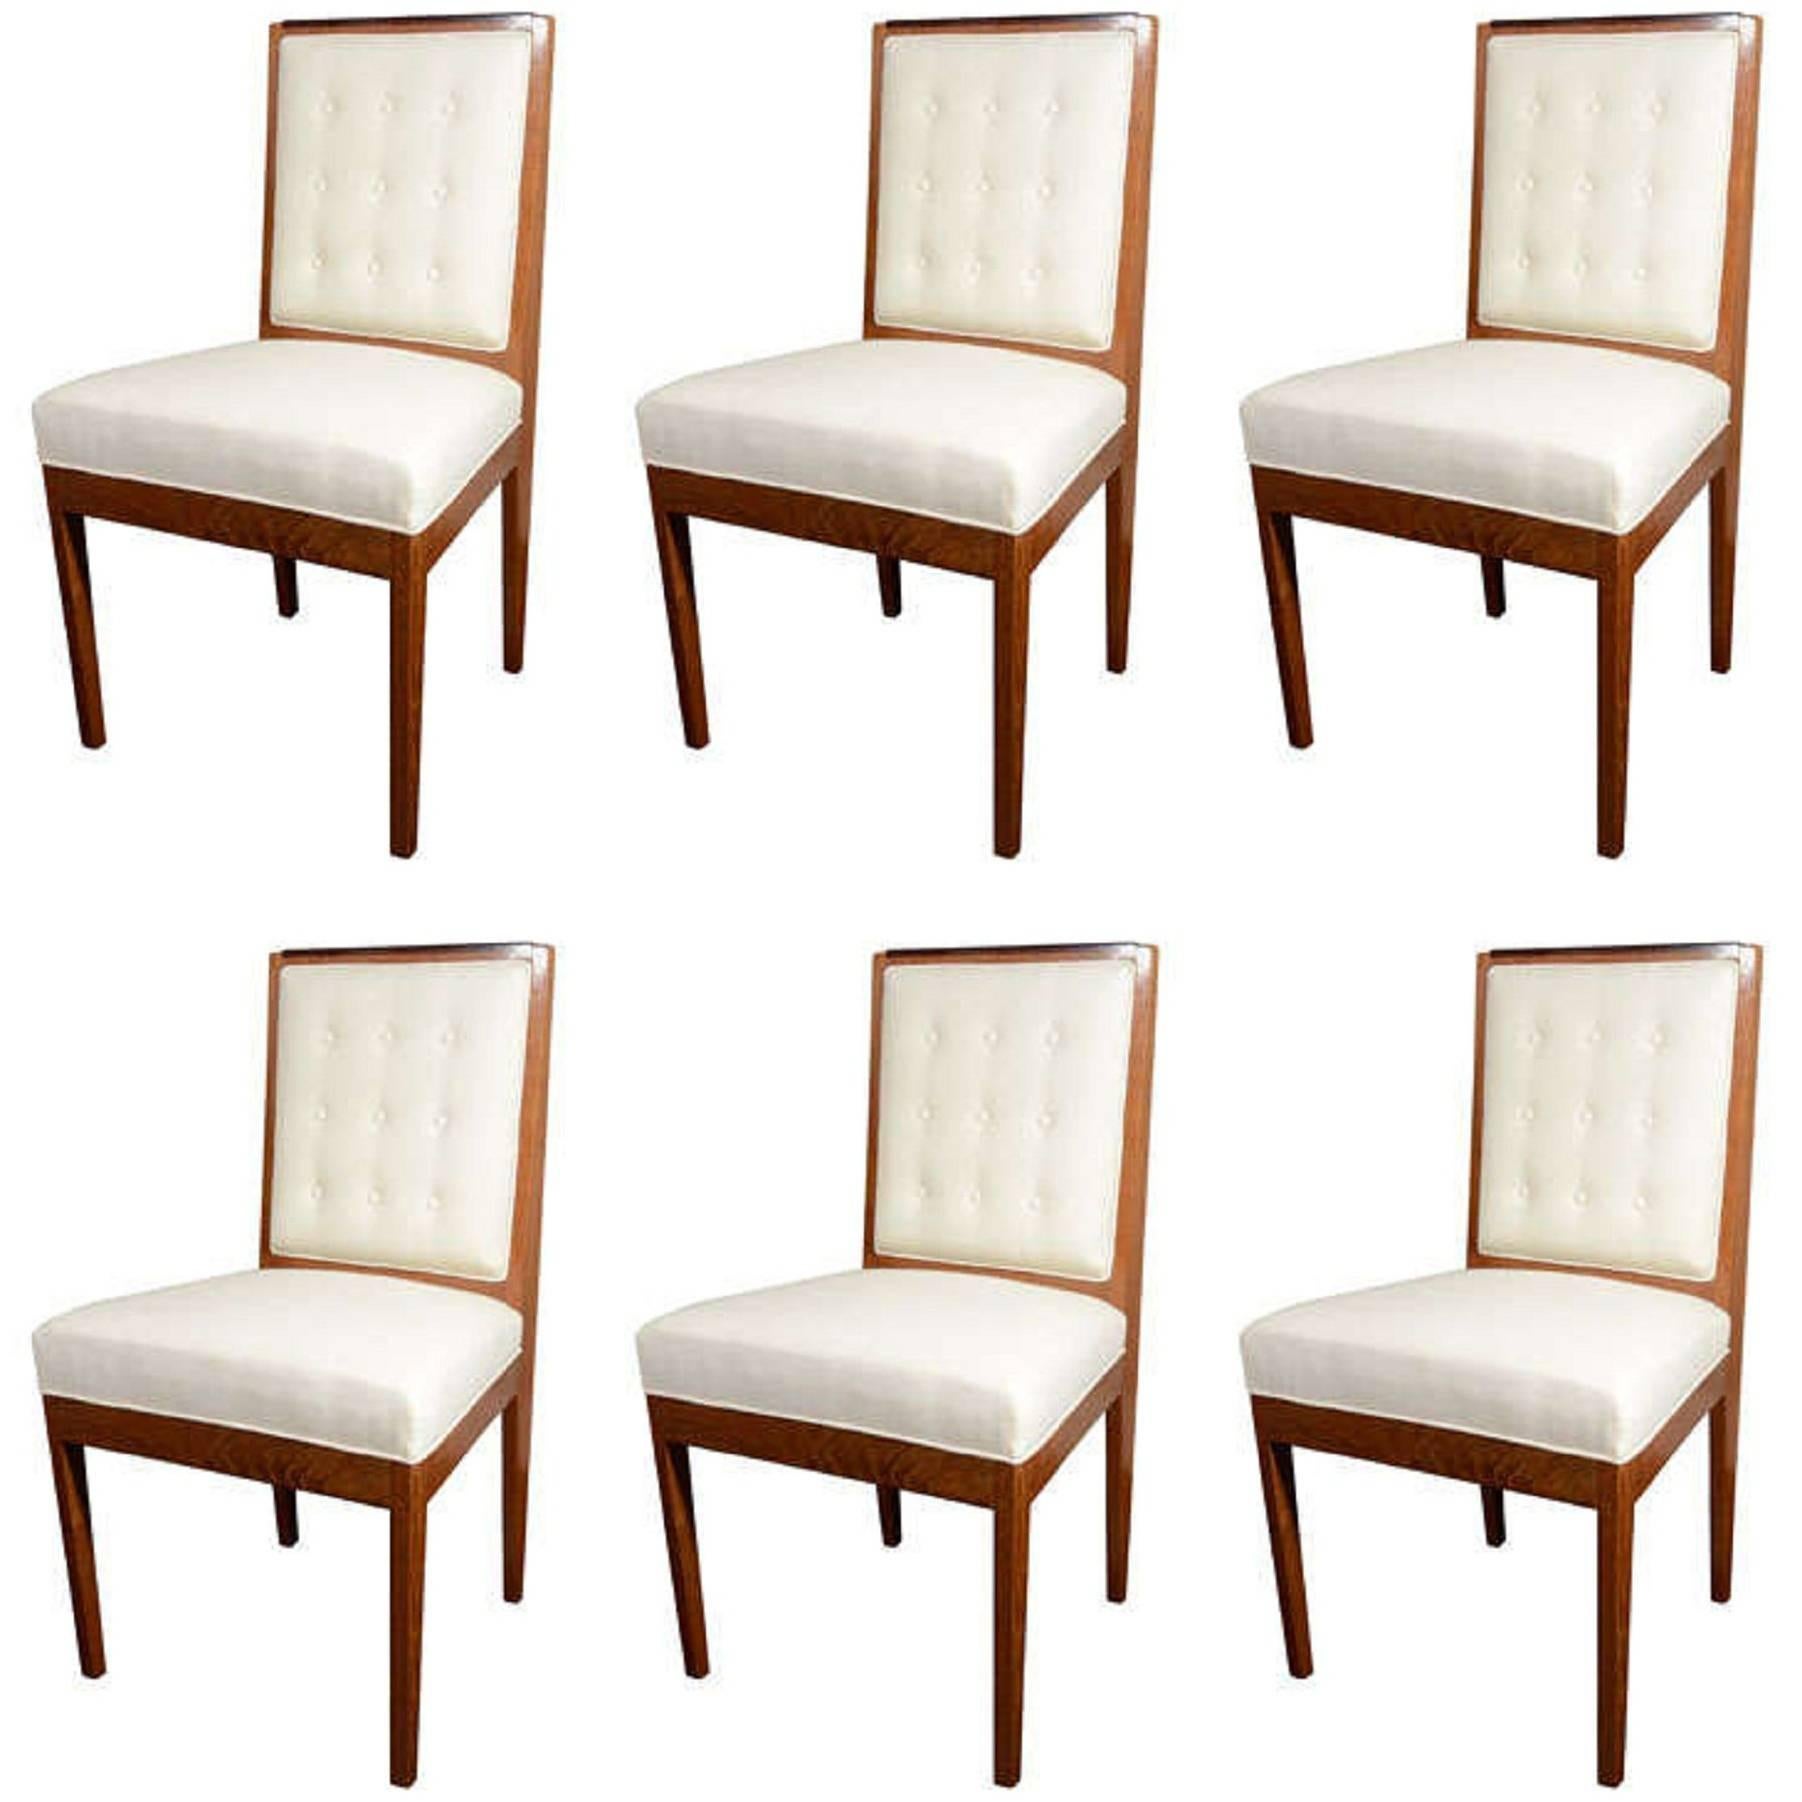 Set of Six Upholstered Dining Chairs, French, circa 1940 For Sale